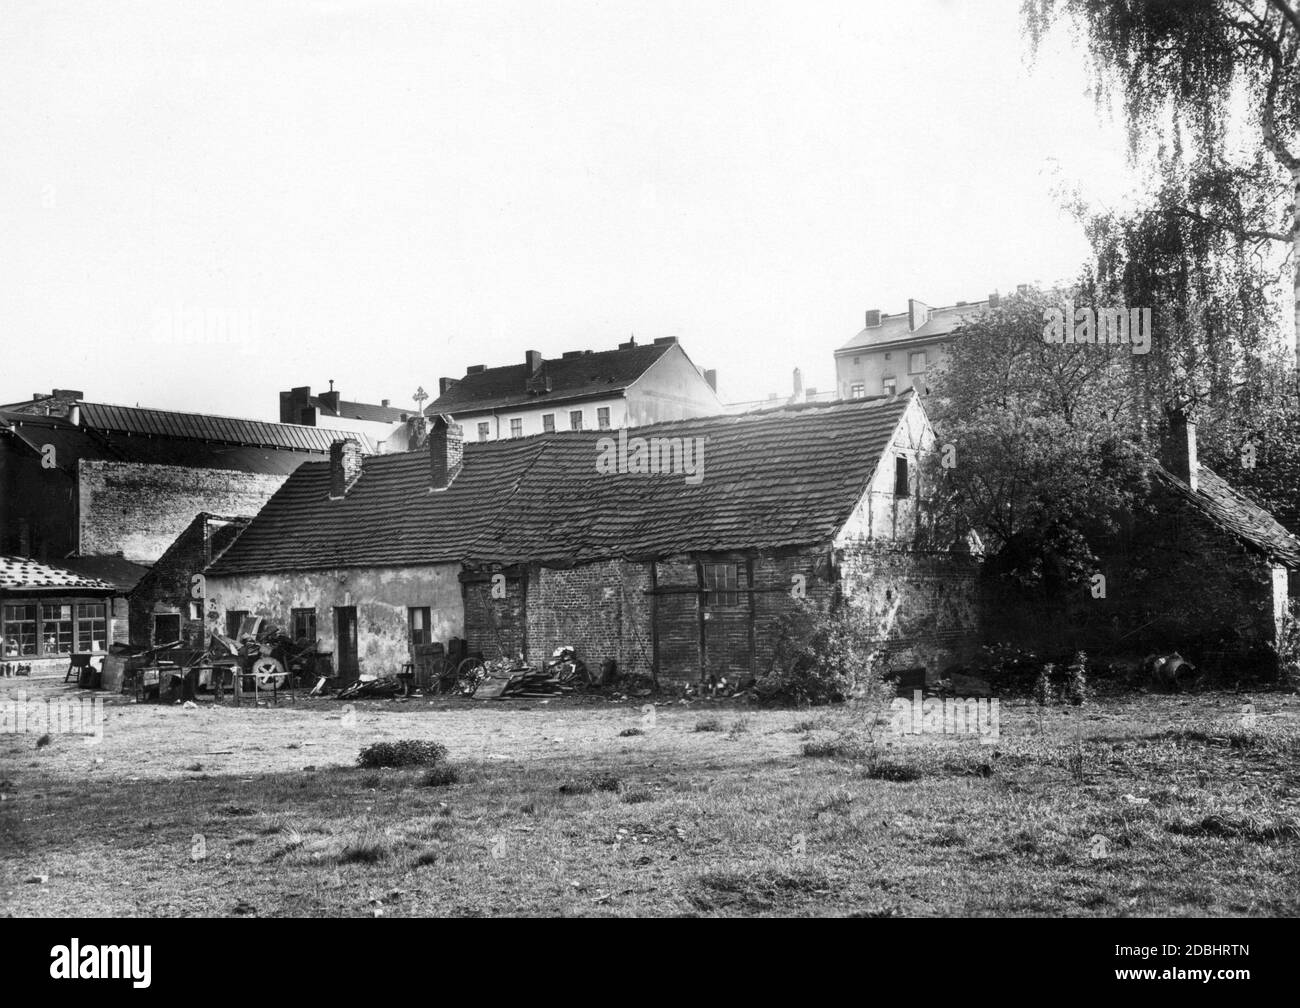 The 1932 photograph shows a decaying, abandoned old farmhouse in Berlin at Muellerstrasse 16, behind which the more modern houses and tenements of the growing city already rise up. Stock Photo